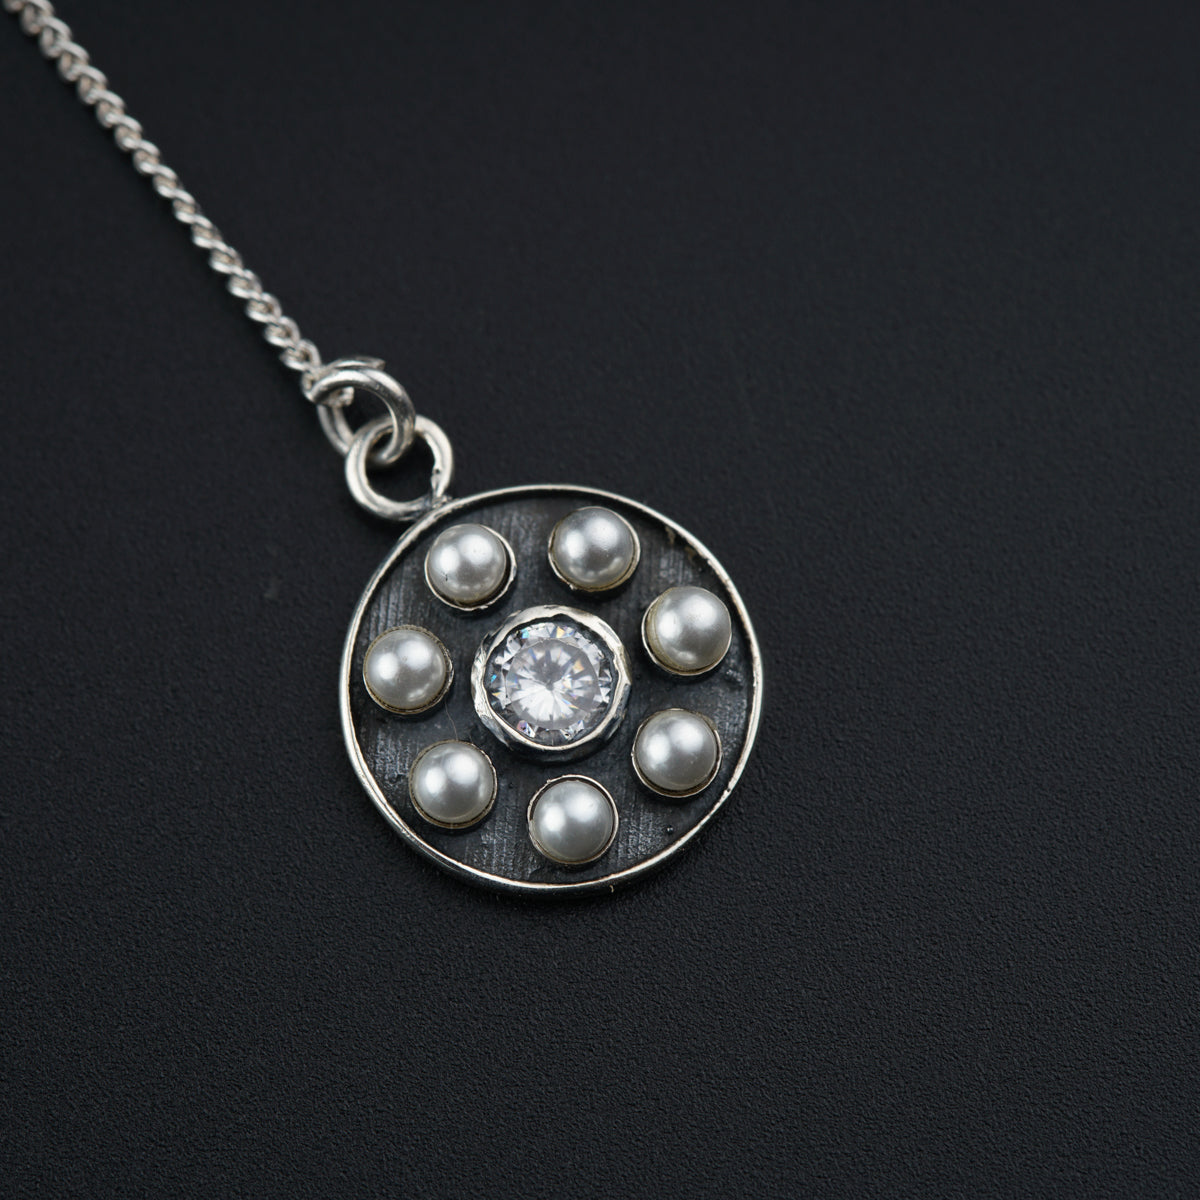 a silver necklace with pearls and a diamond